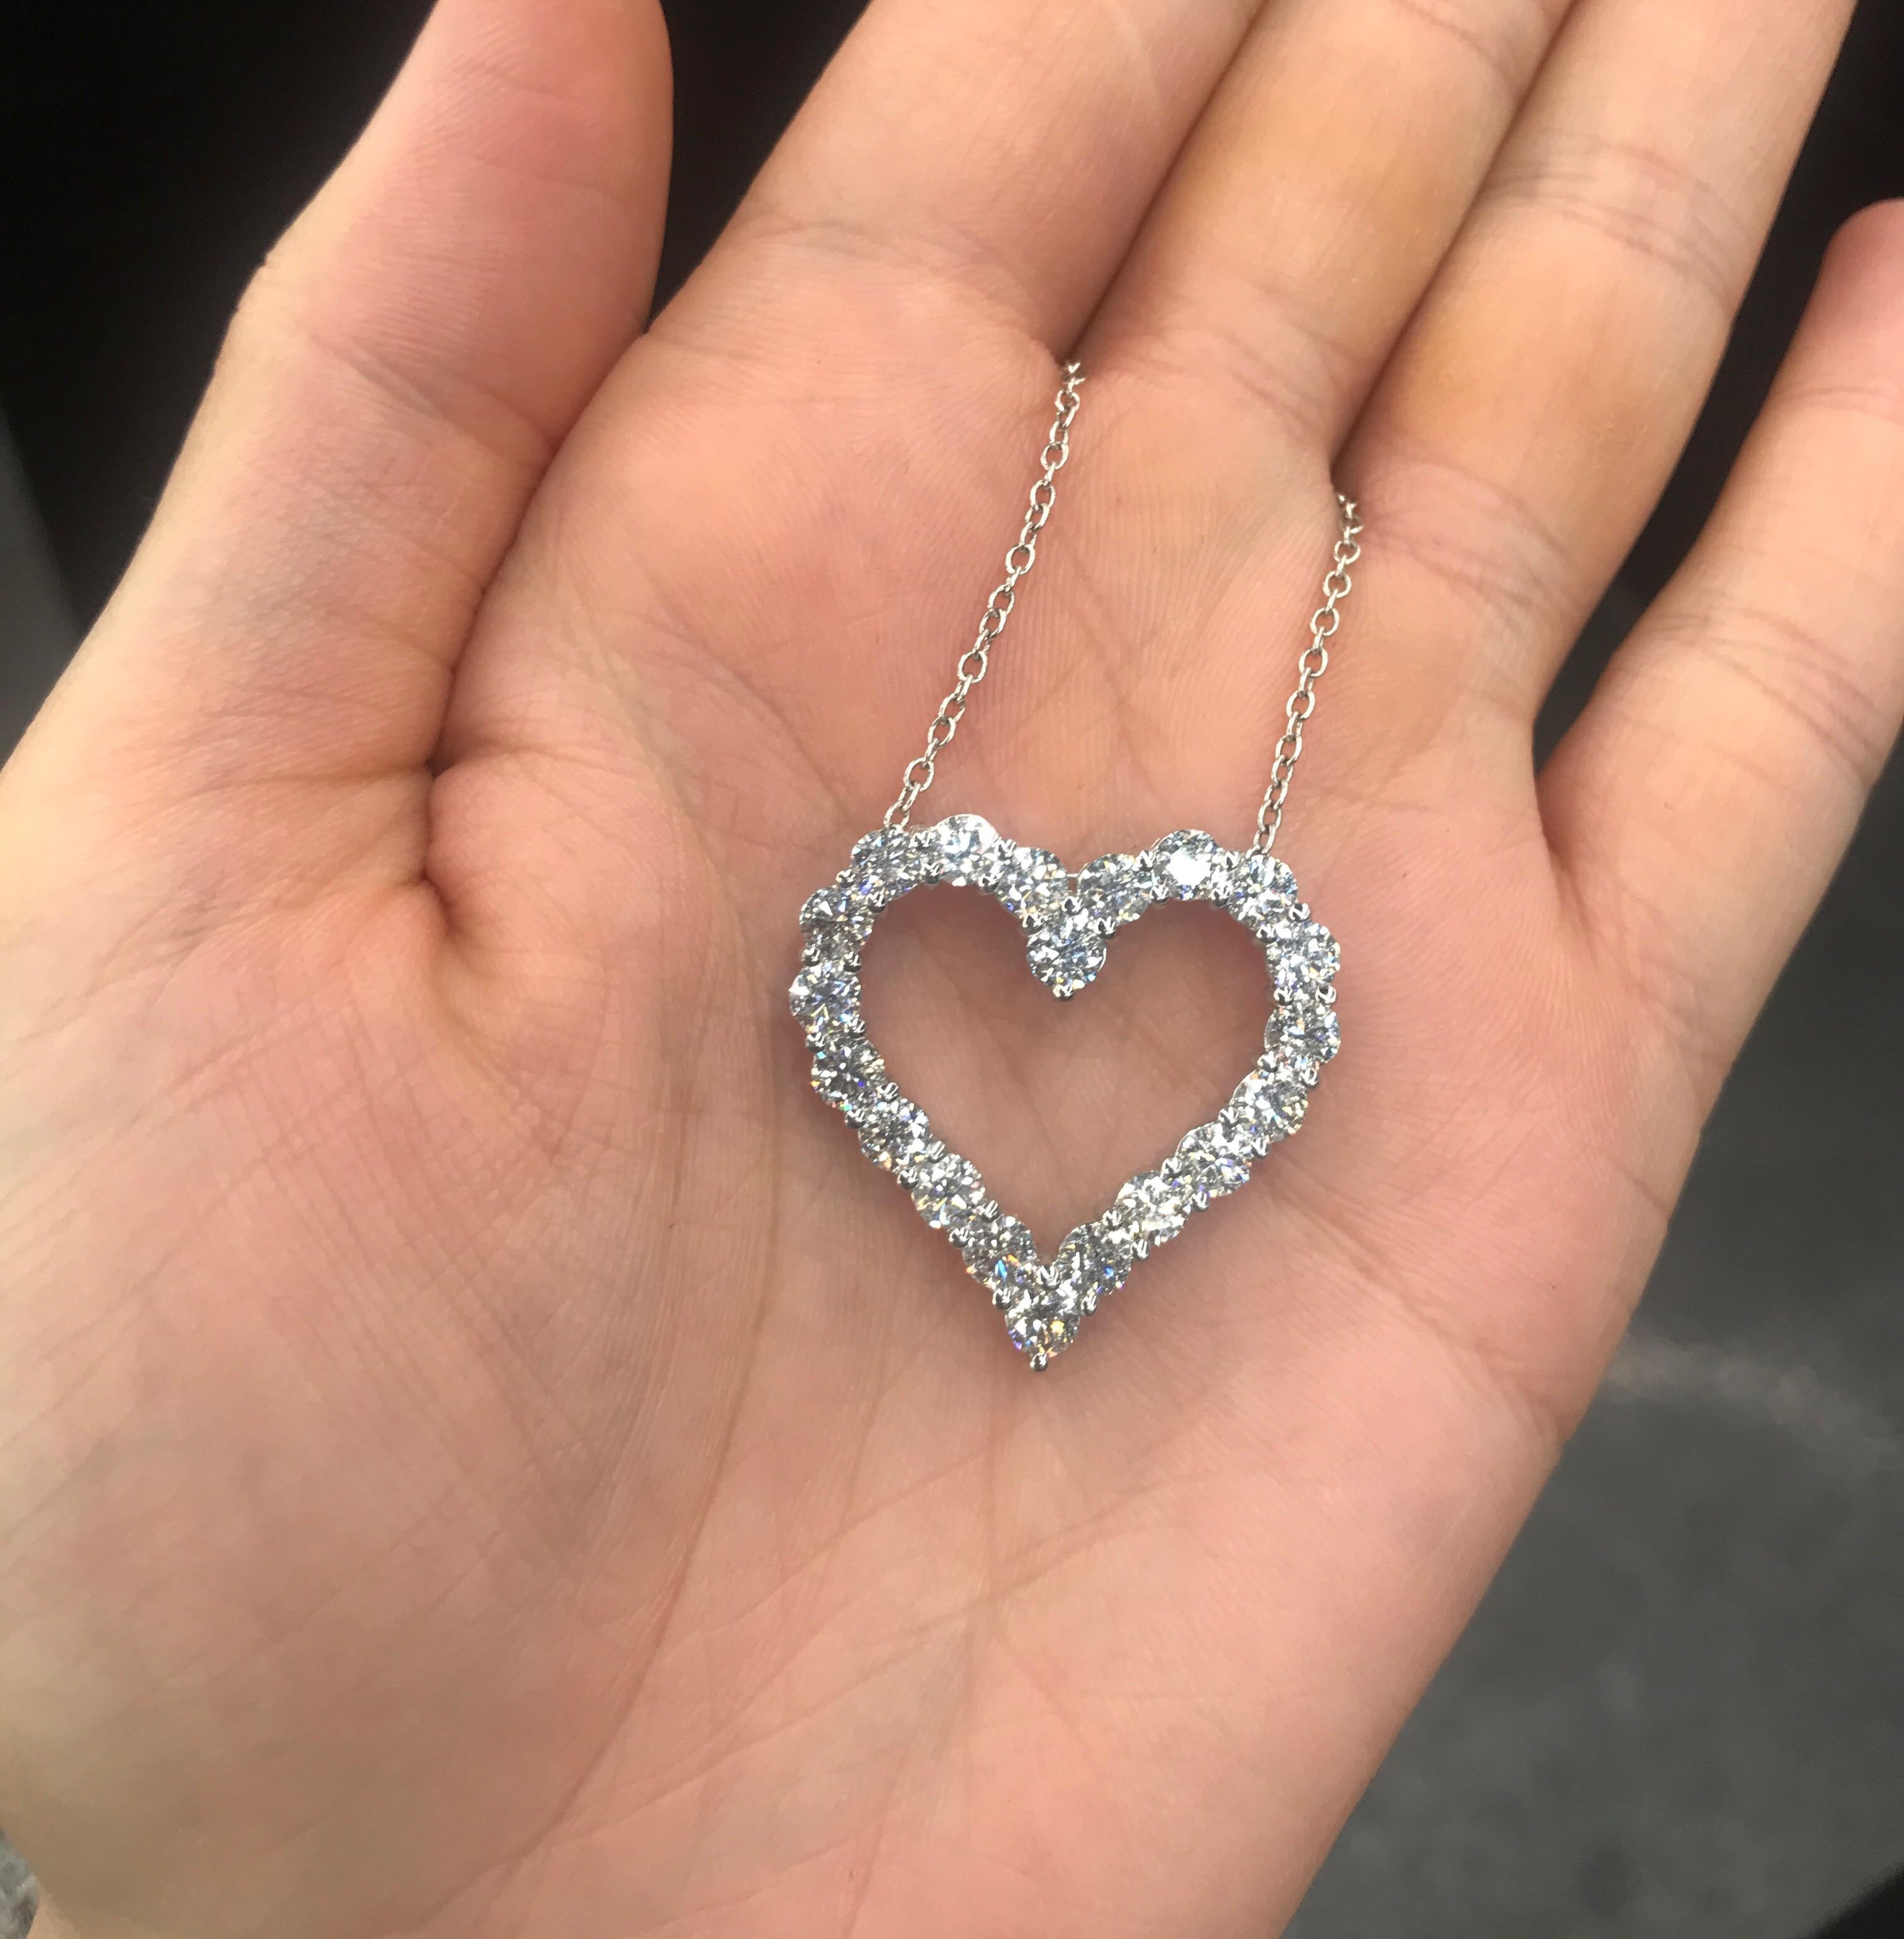 14KT White gold heart pendant featuring 20 round brilliants weighing 3.77 carats.
Color: G
Clarity: VS
A real show stopper!!

Can customize in any size, quality or gemstone. 